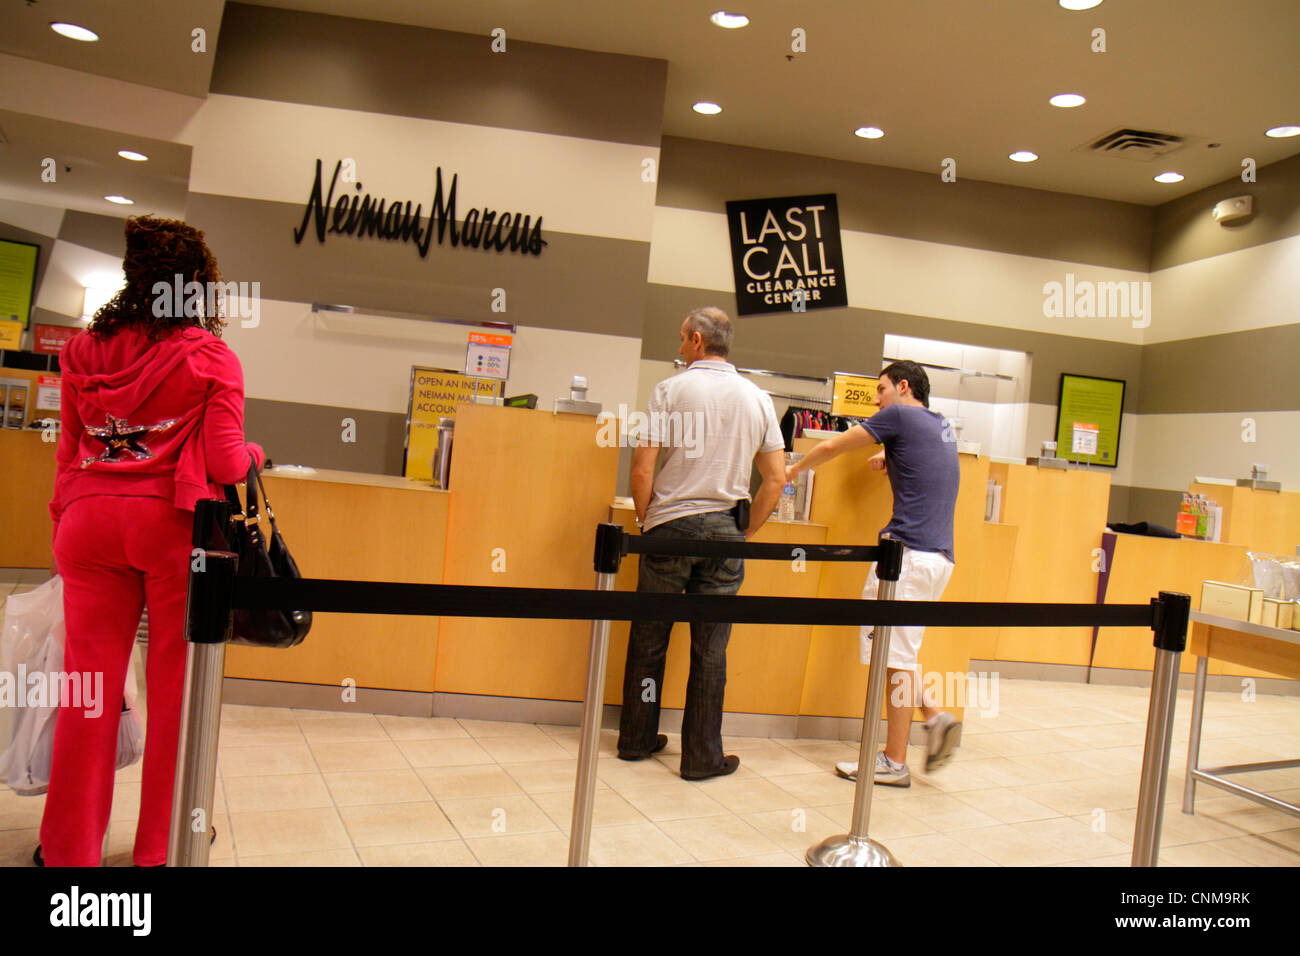 Miami Florida,Sweetwater,Dolphin mall,Neiman Marcus,Last Call Clearance Center,centre,clothing,accessories,display sale,luxury,return desk,customer se Stock Photo